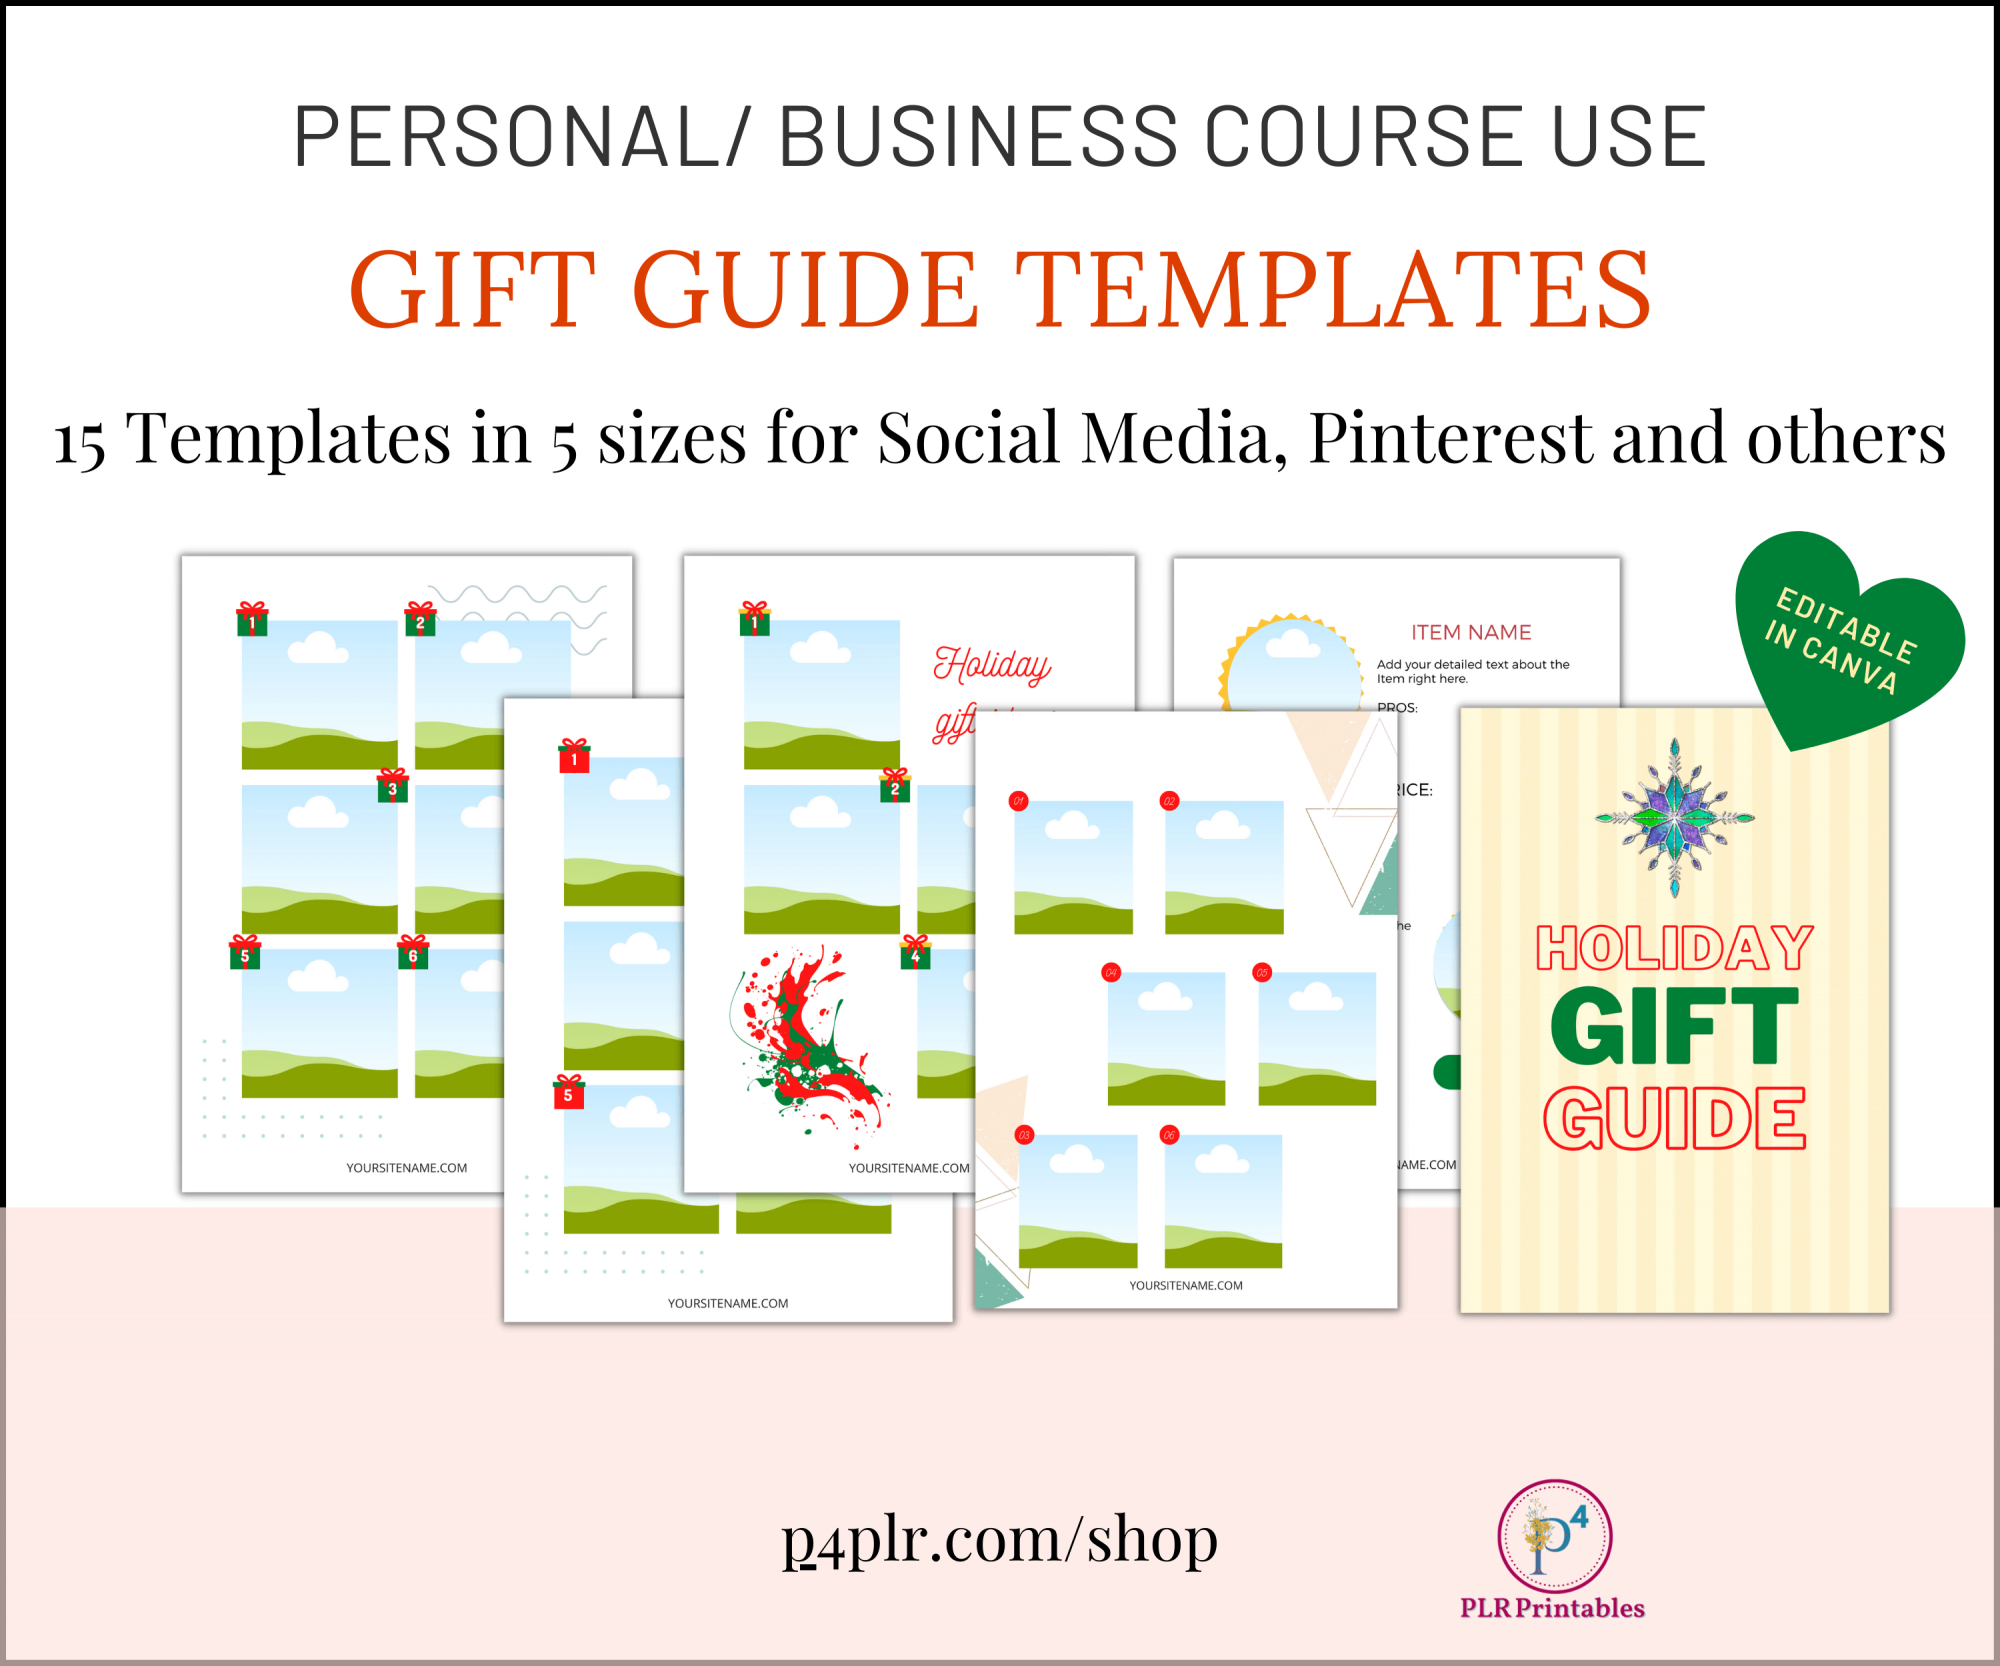 NEW! Gift Guide Templates for Bloggers and Coaches